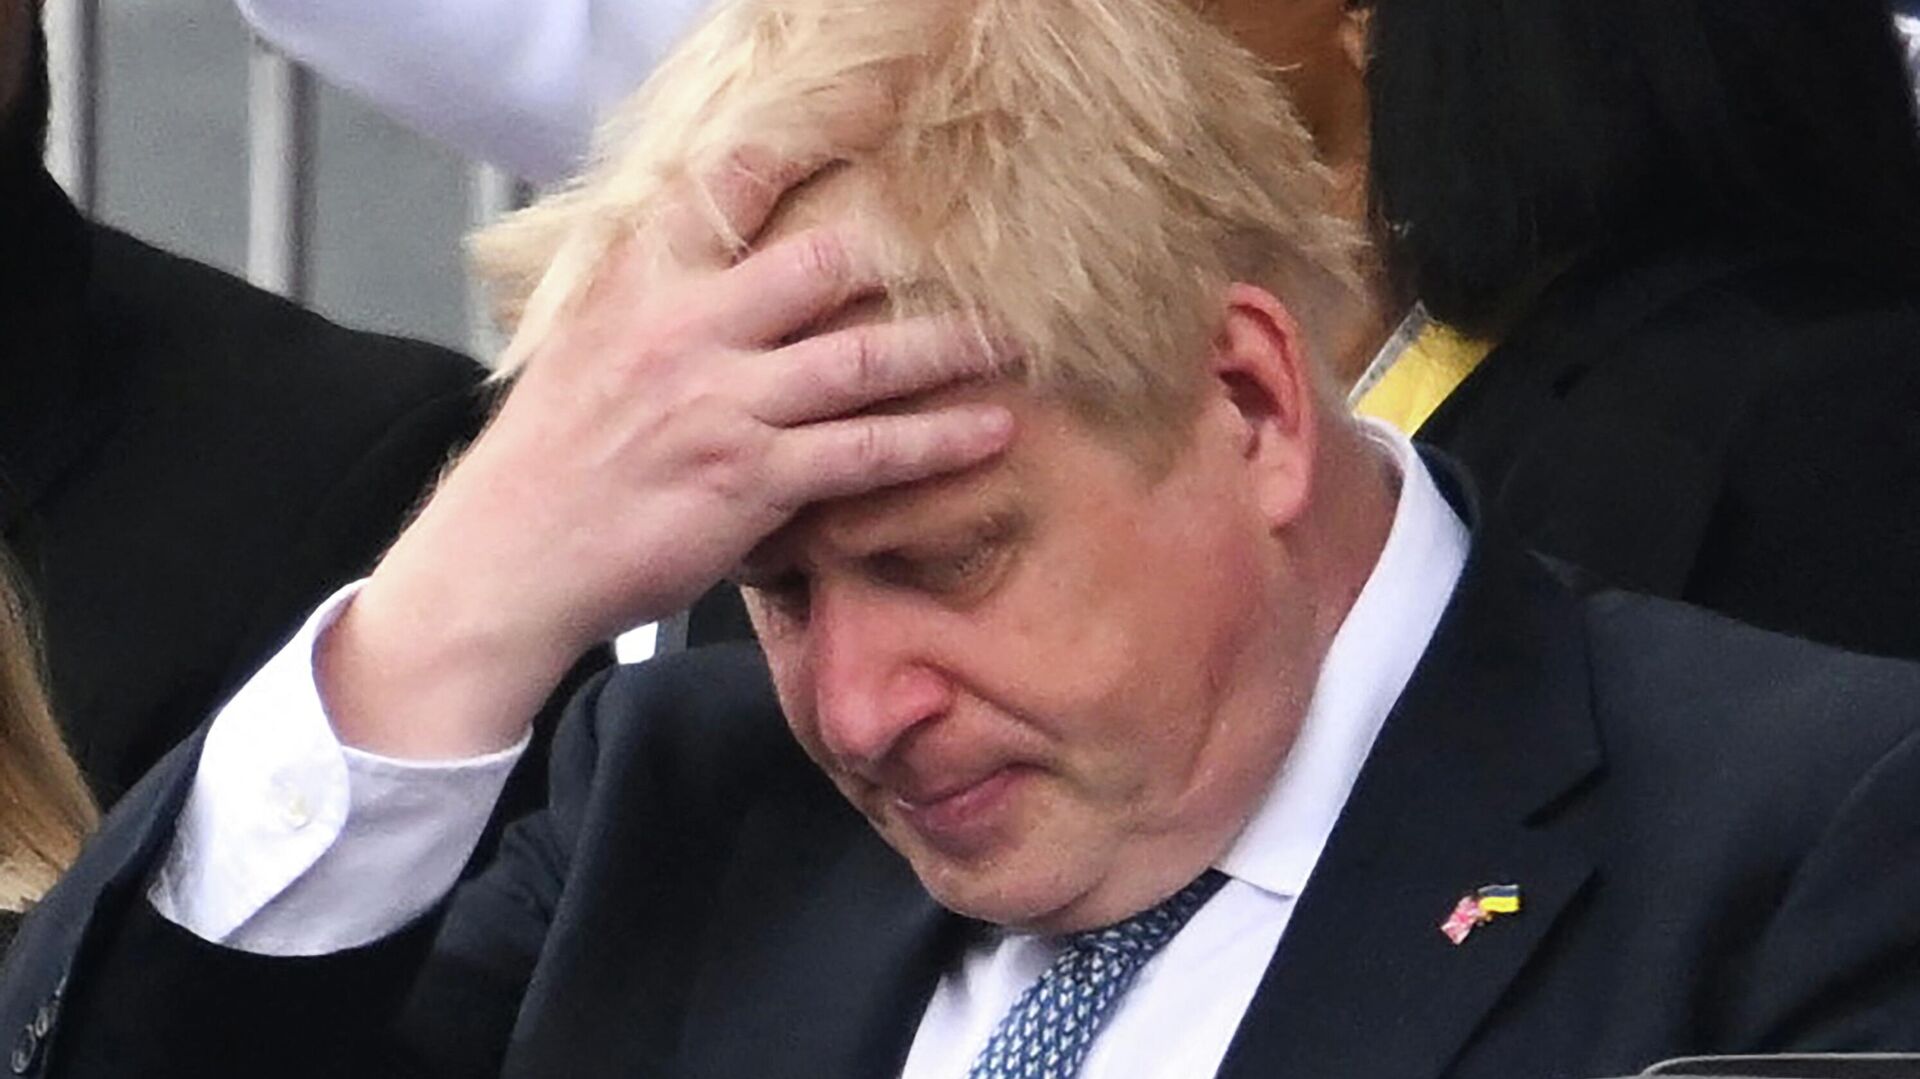 (FILES) In this file photo taken on June 5, 2022 shows Britain's Prime Minister Boris Johnson reacts during the Platinum Pageant in London on June 5, 2022 as part of Queen Elizabeth II's platinum jubilee celebrations - Sputnik International, 1920, 04.07.2022